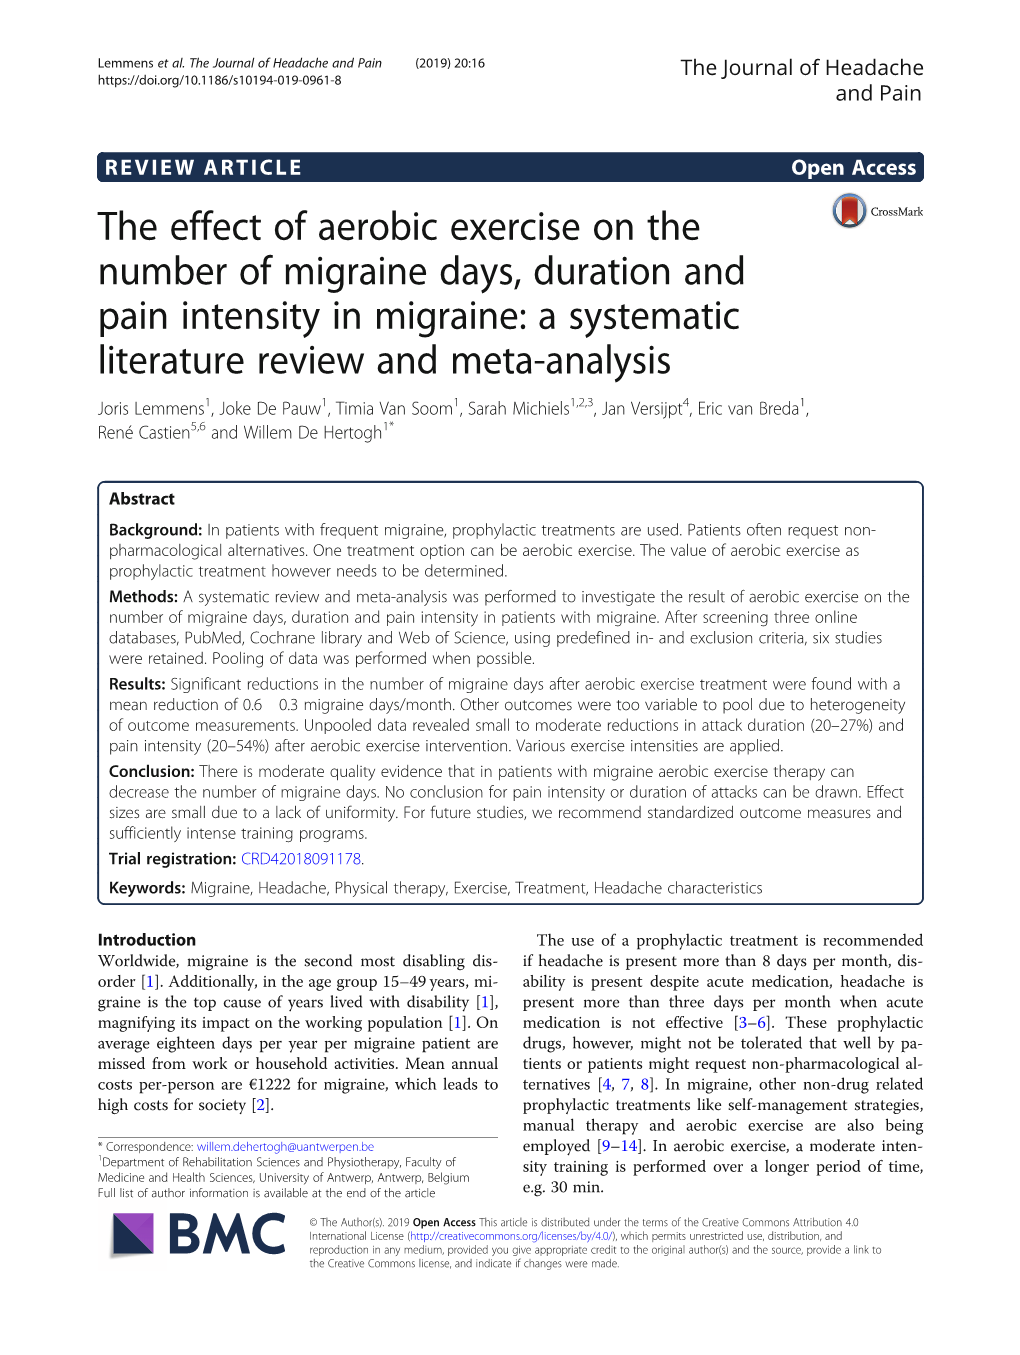 The Effect of Aerobic Exercise on the Number of Migraine Days, Duration